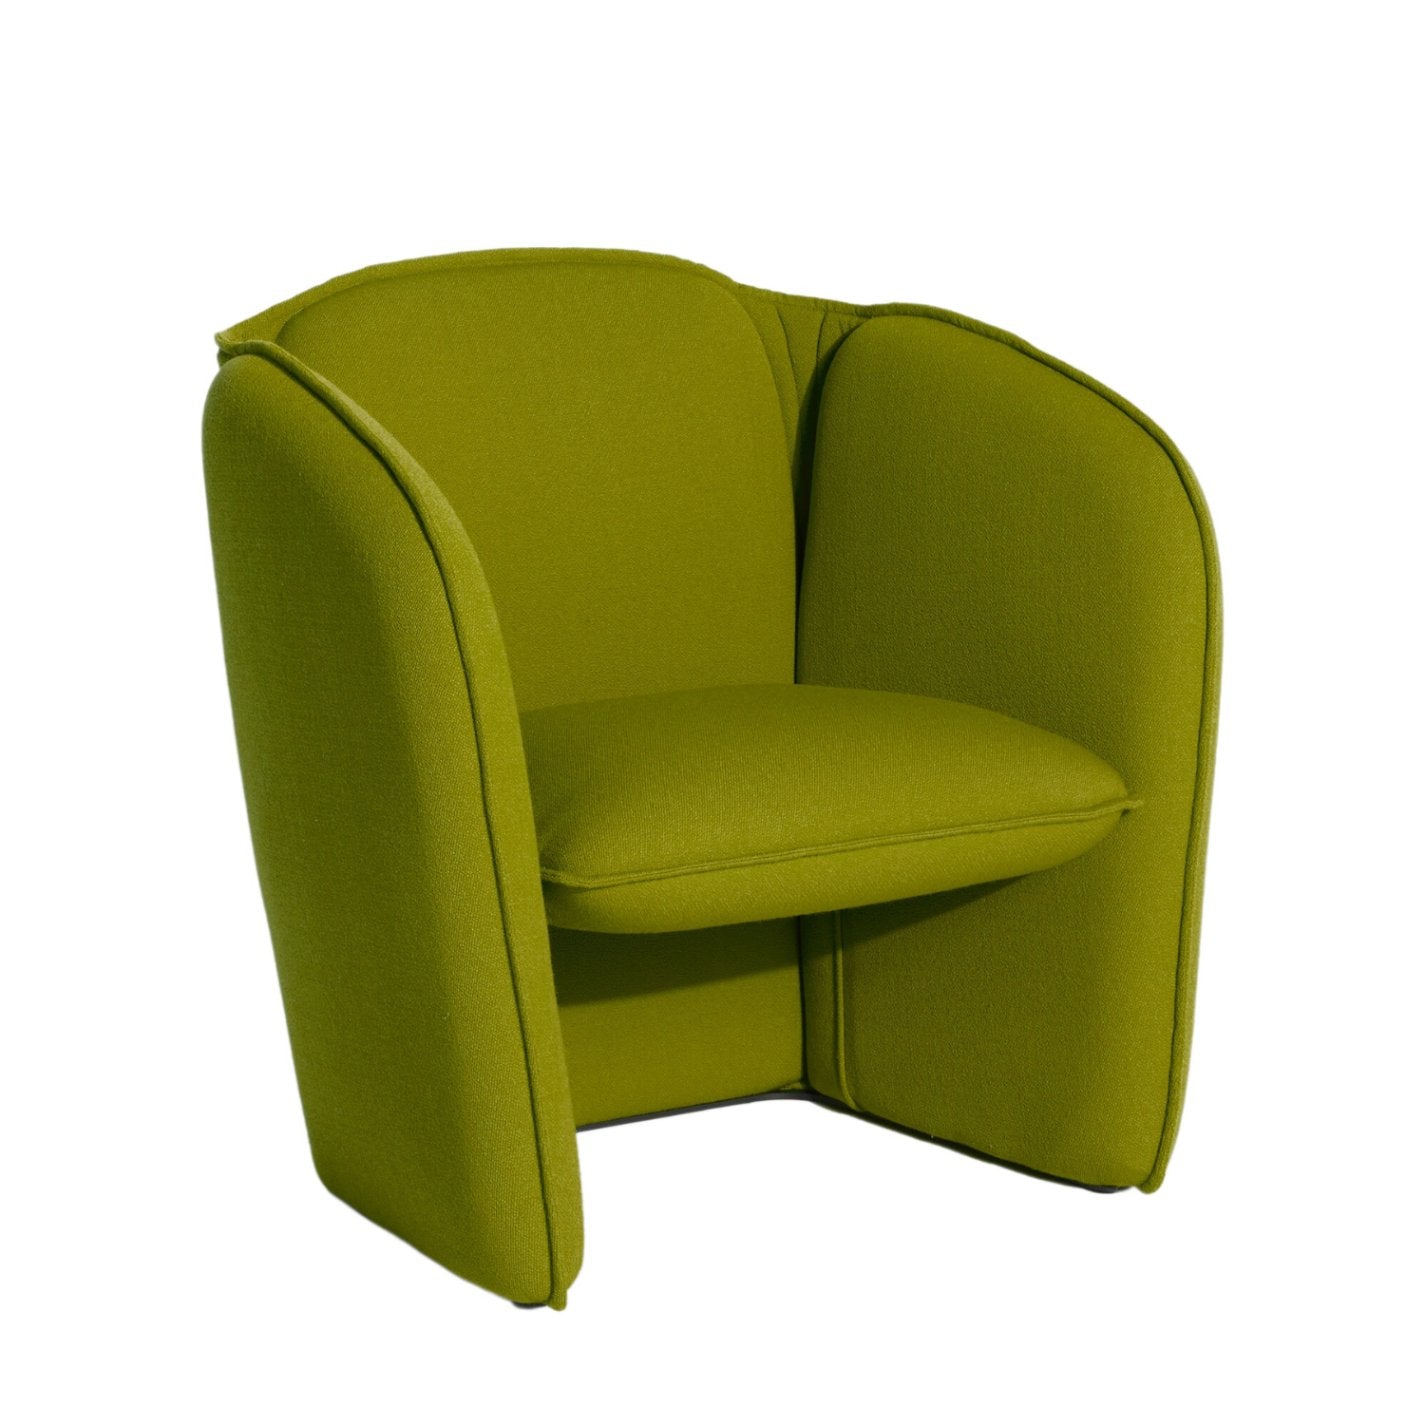 LILY - Armchair